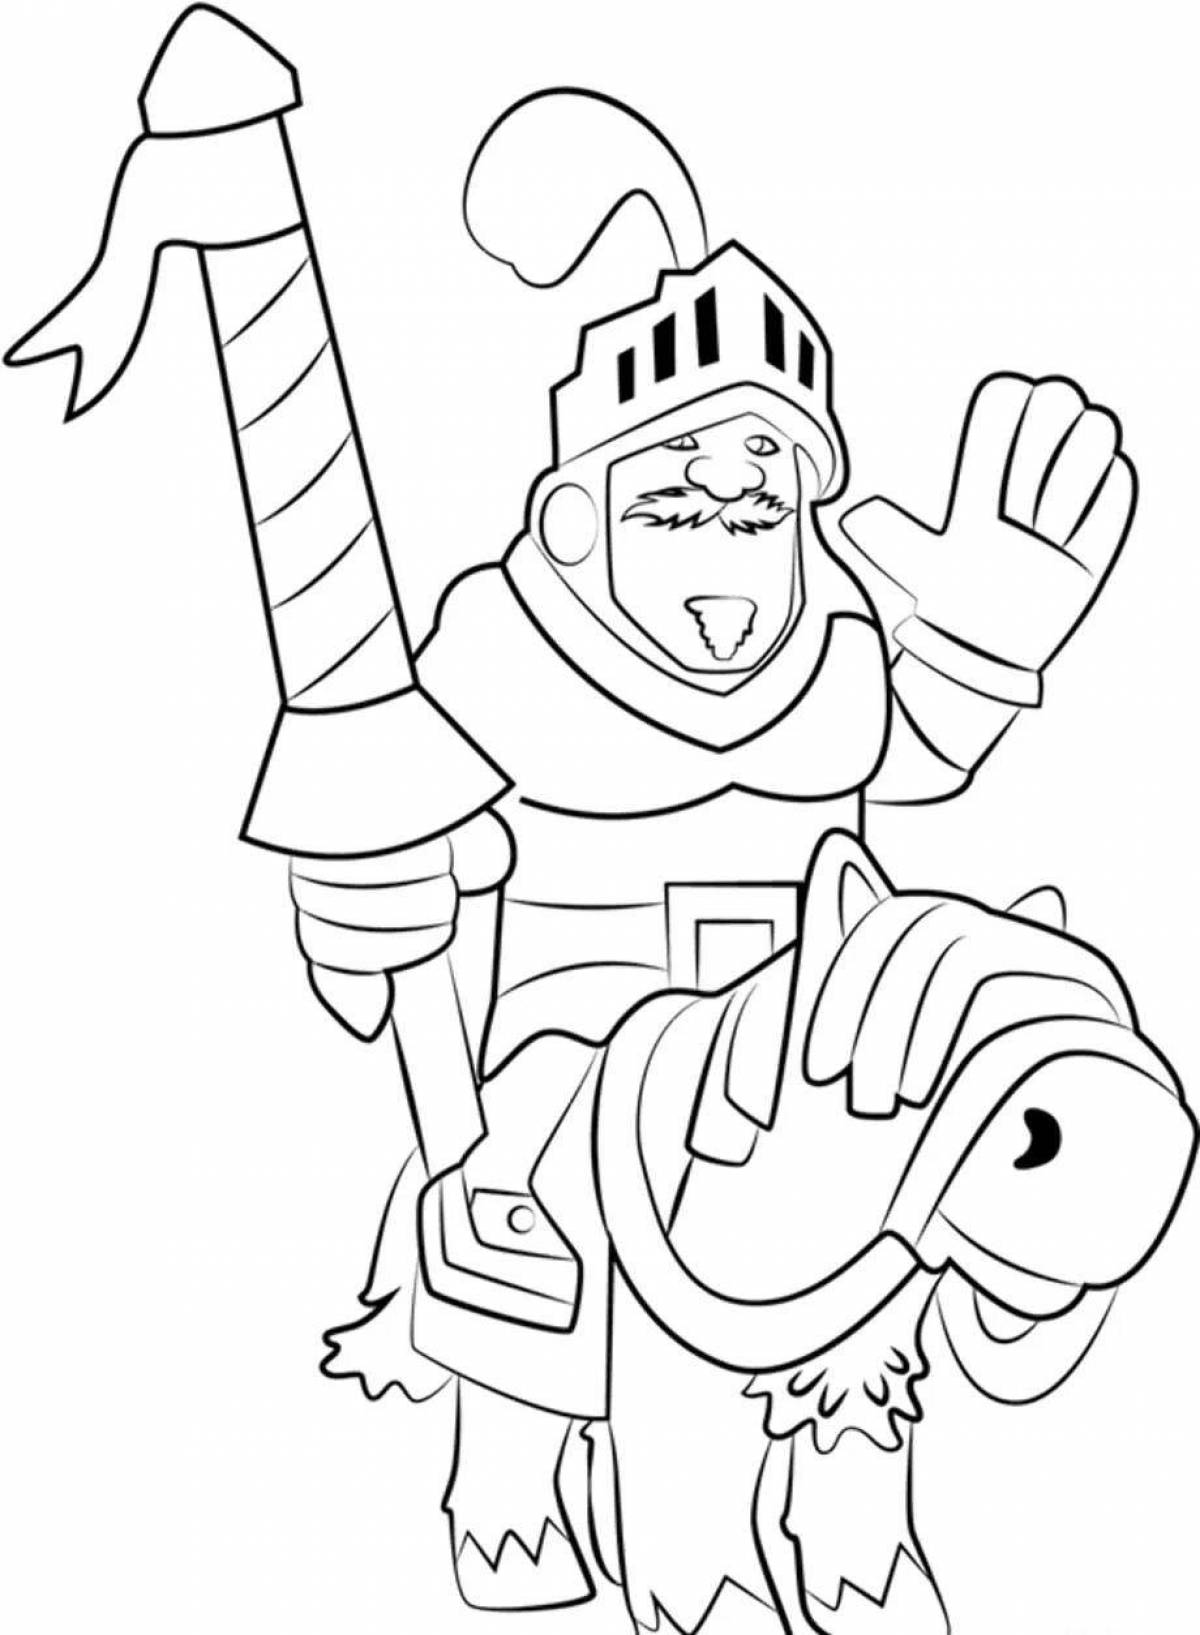 Tempting clash royale coloring page